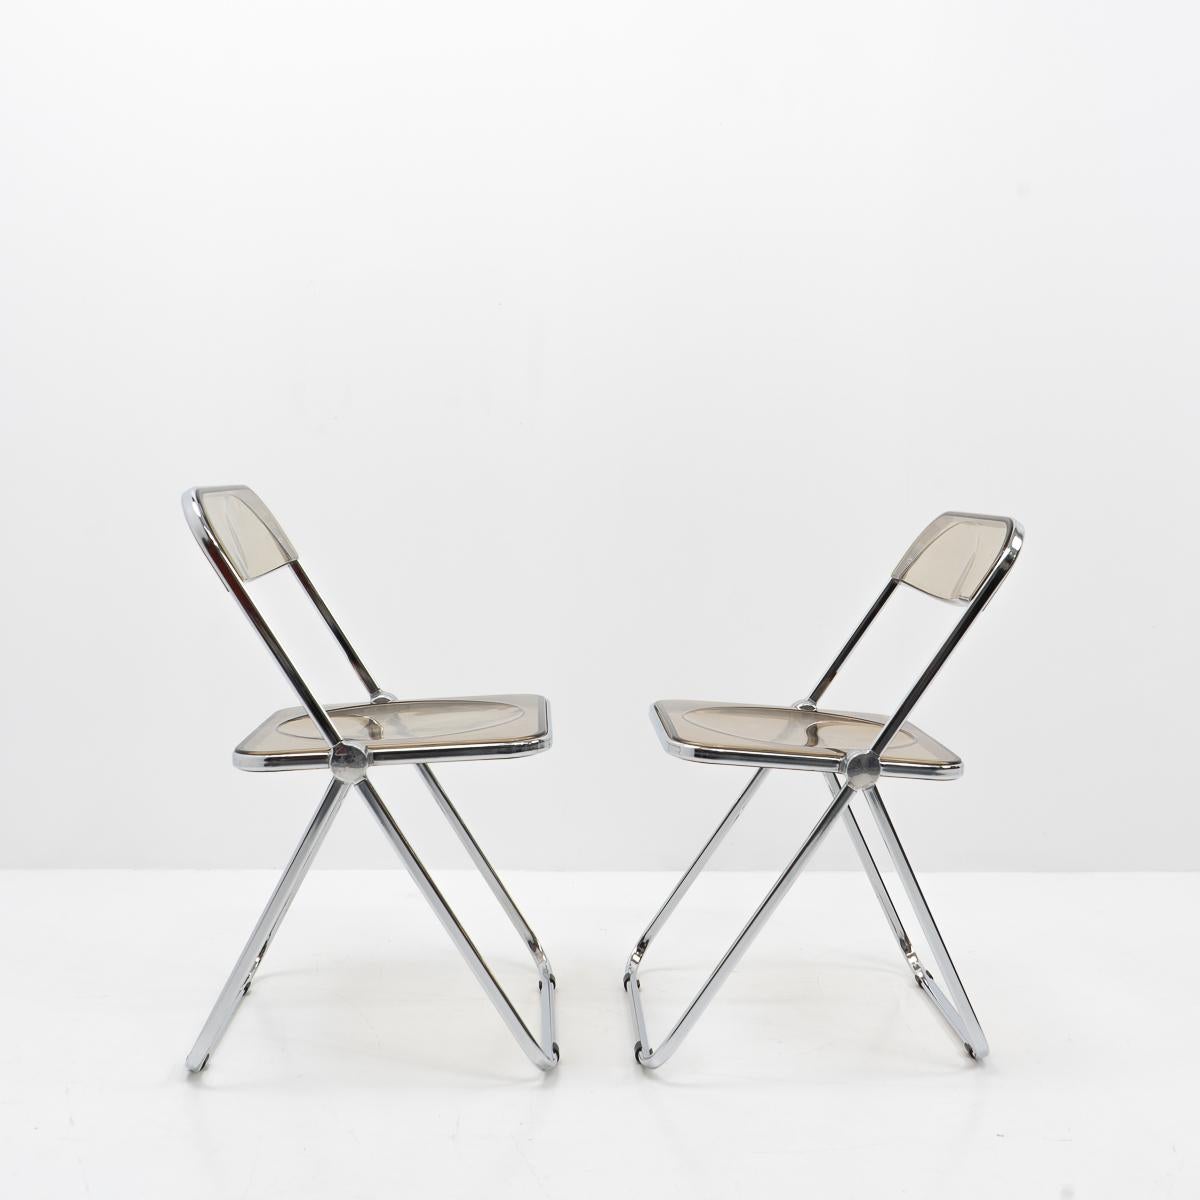 Giancarlo Piretti for Castelli, Plia Chairs, Set of Two, 1970s In Good Condition For Sale In Renens, CH